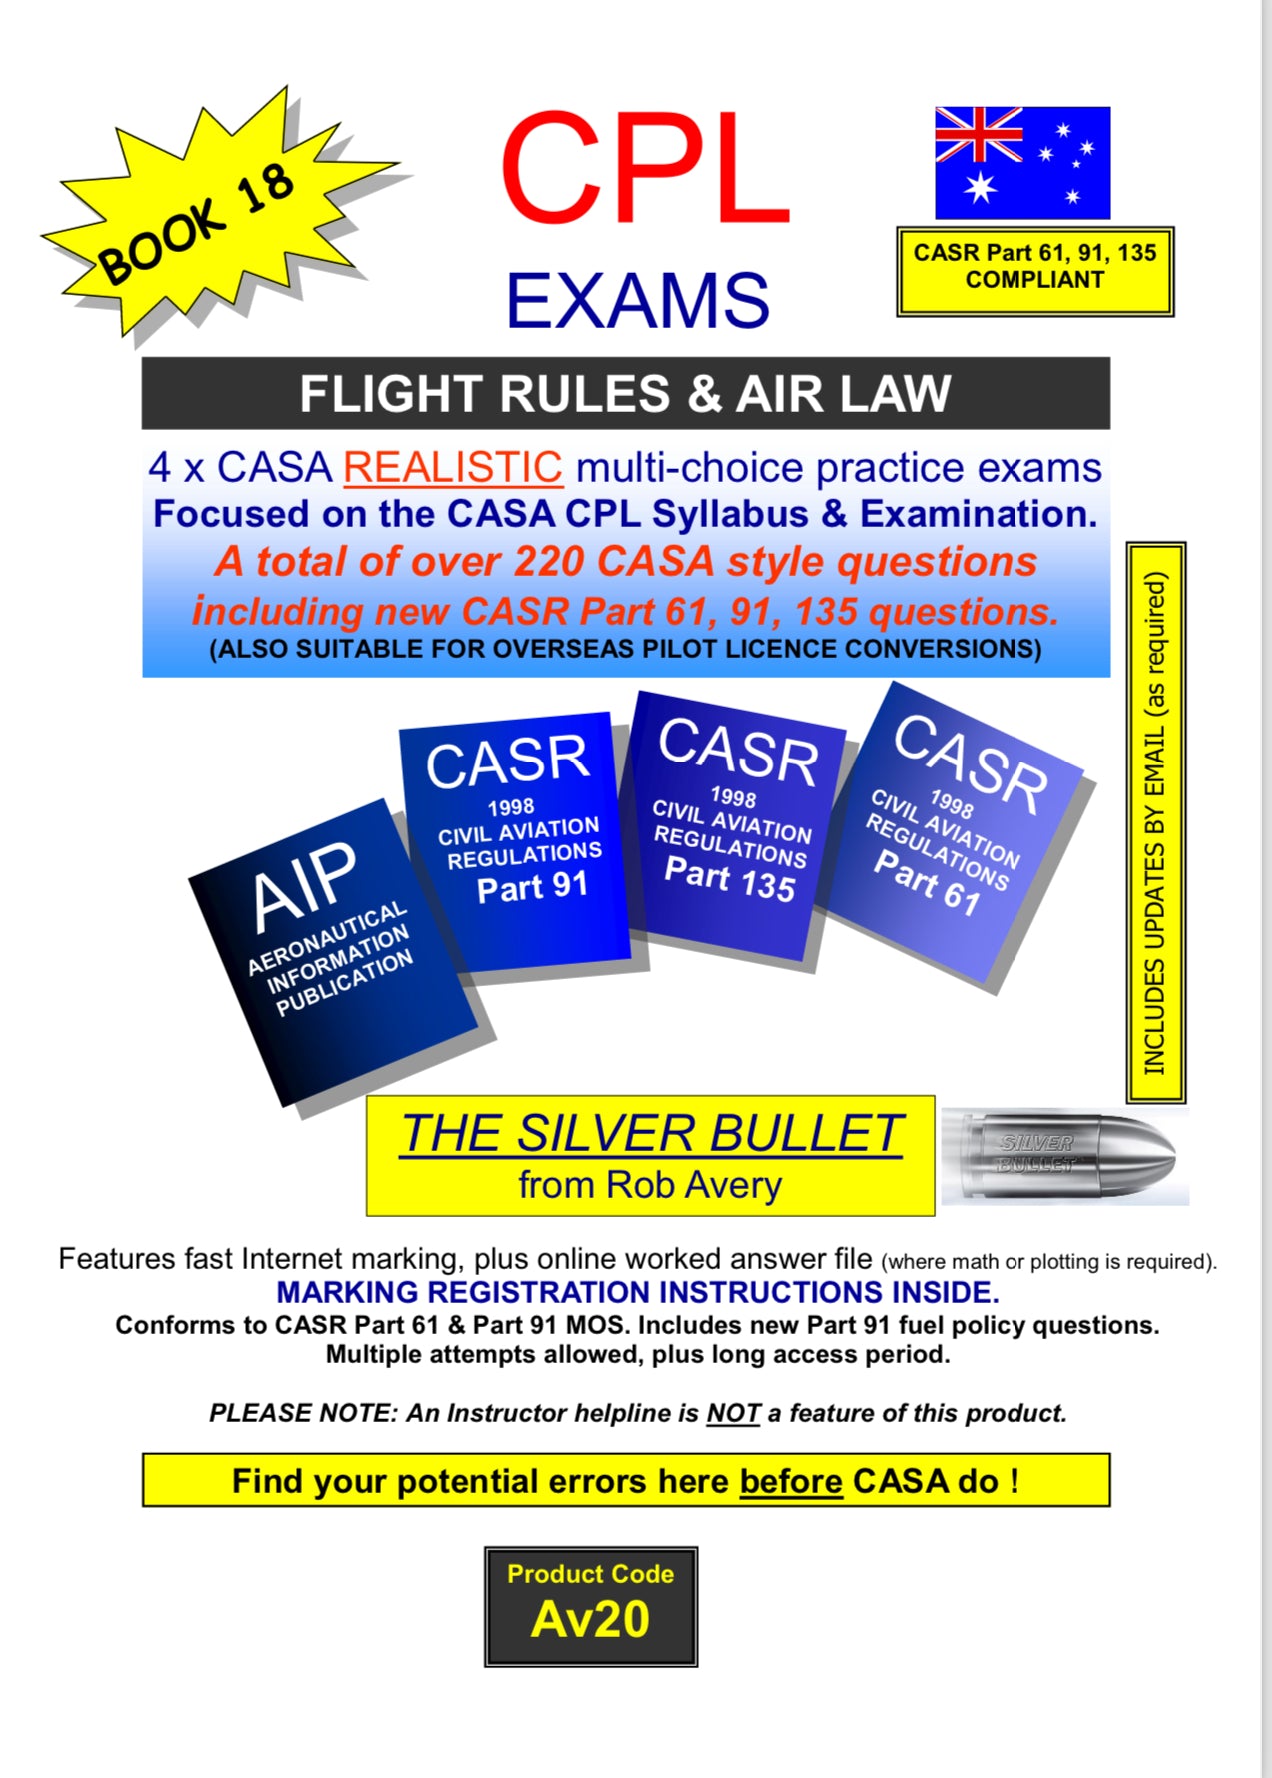 Avfacts by Rob Avery CPL Flight Rules & Air Law Practice Exams - AV20